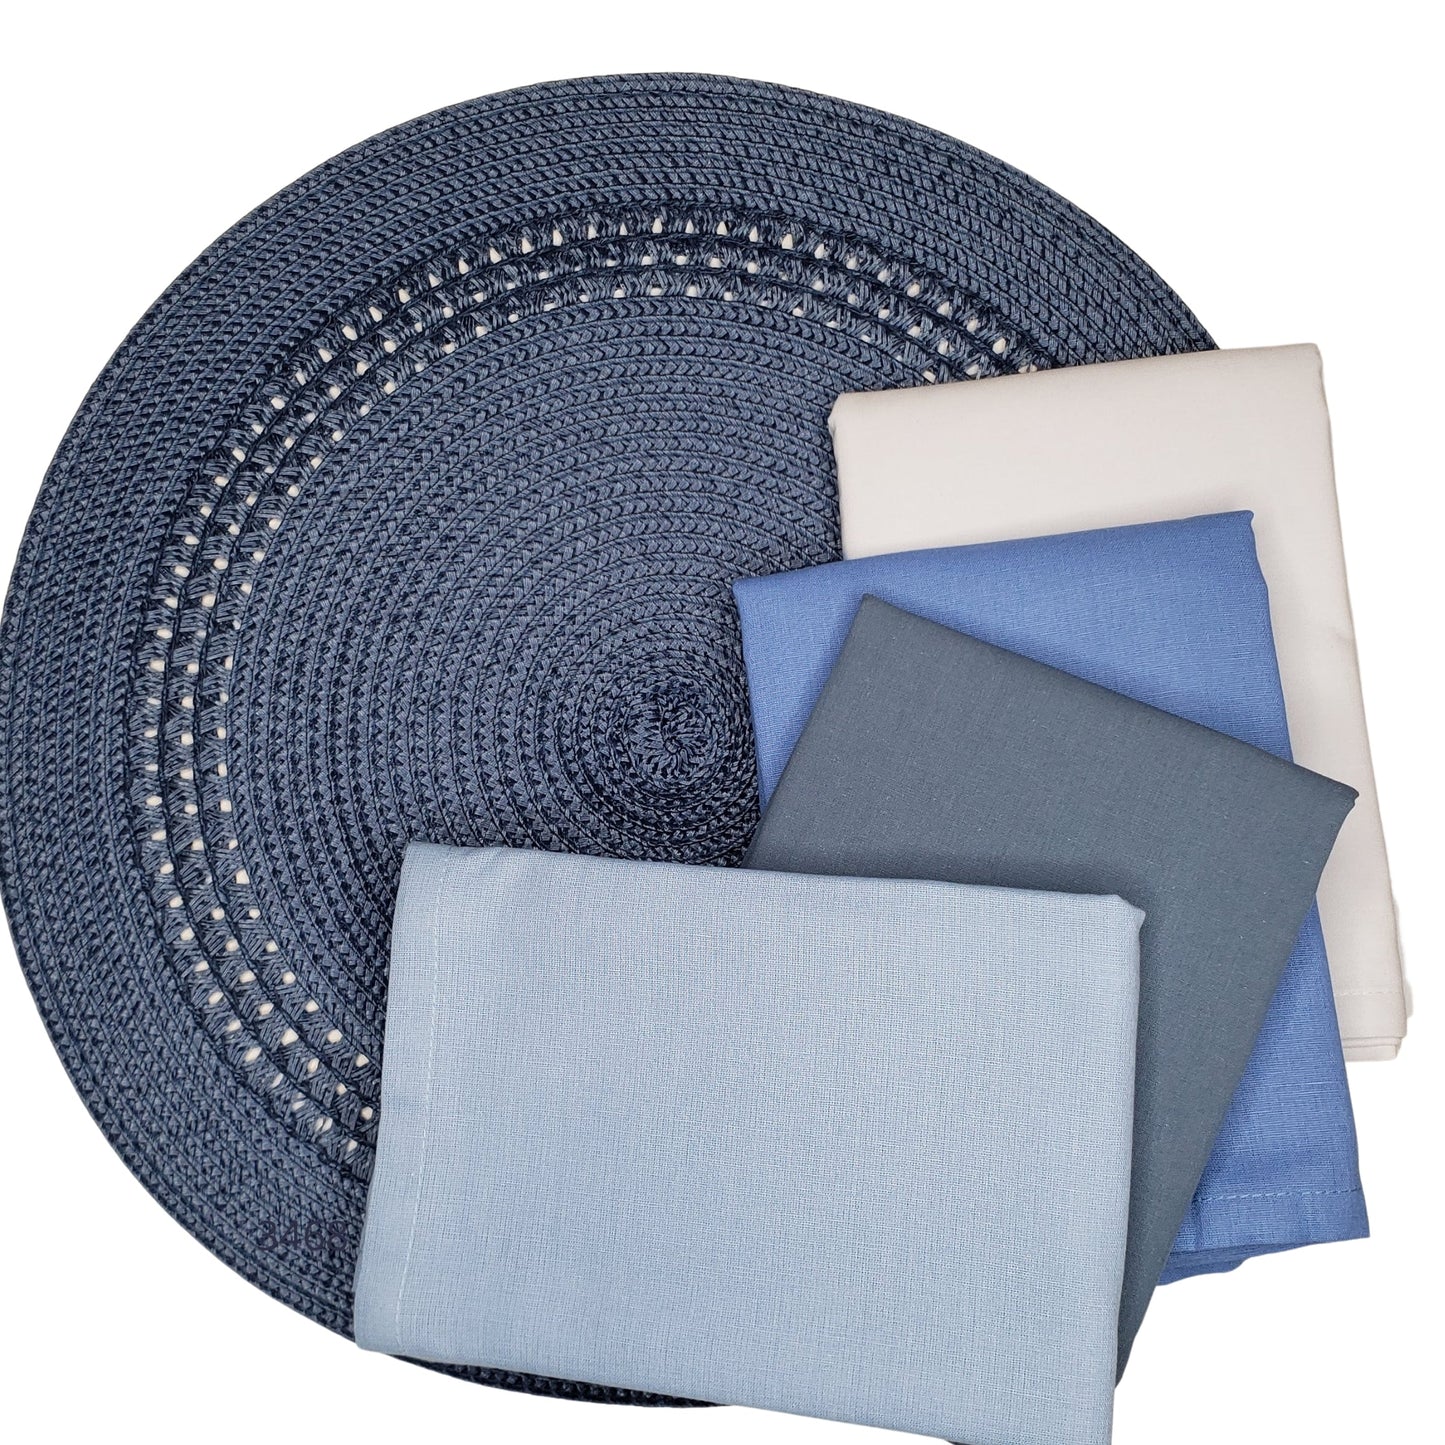 Charlo's Set of 4 Blue 100% Solid Cotton Cloth Napkins 15" by 15"